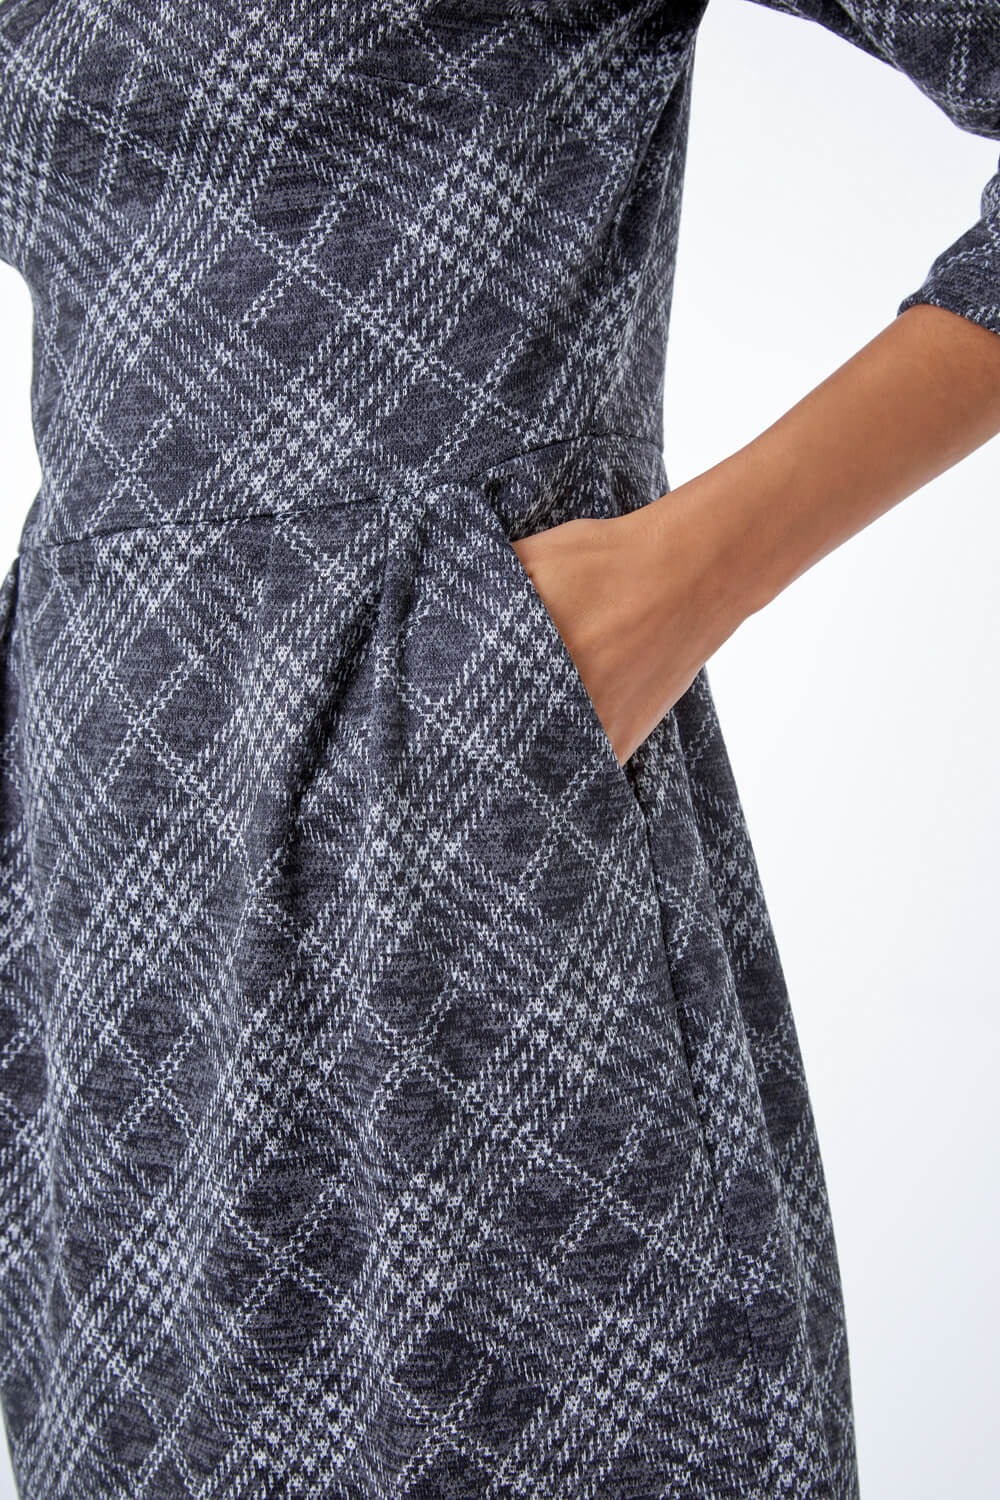 Dark Grey Checked Pleat Front Dress, Image 5 of 5